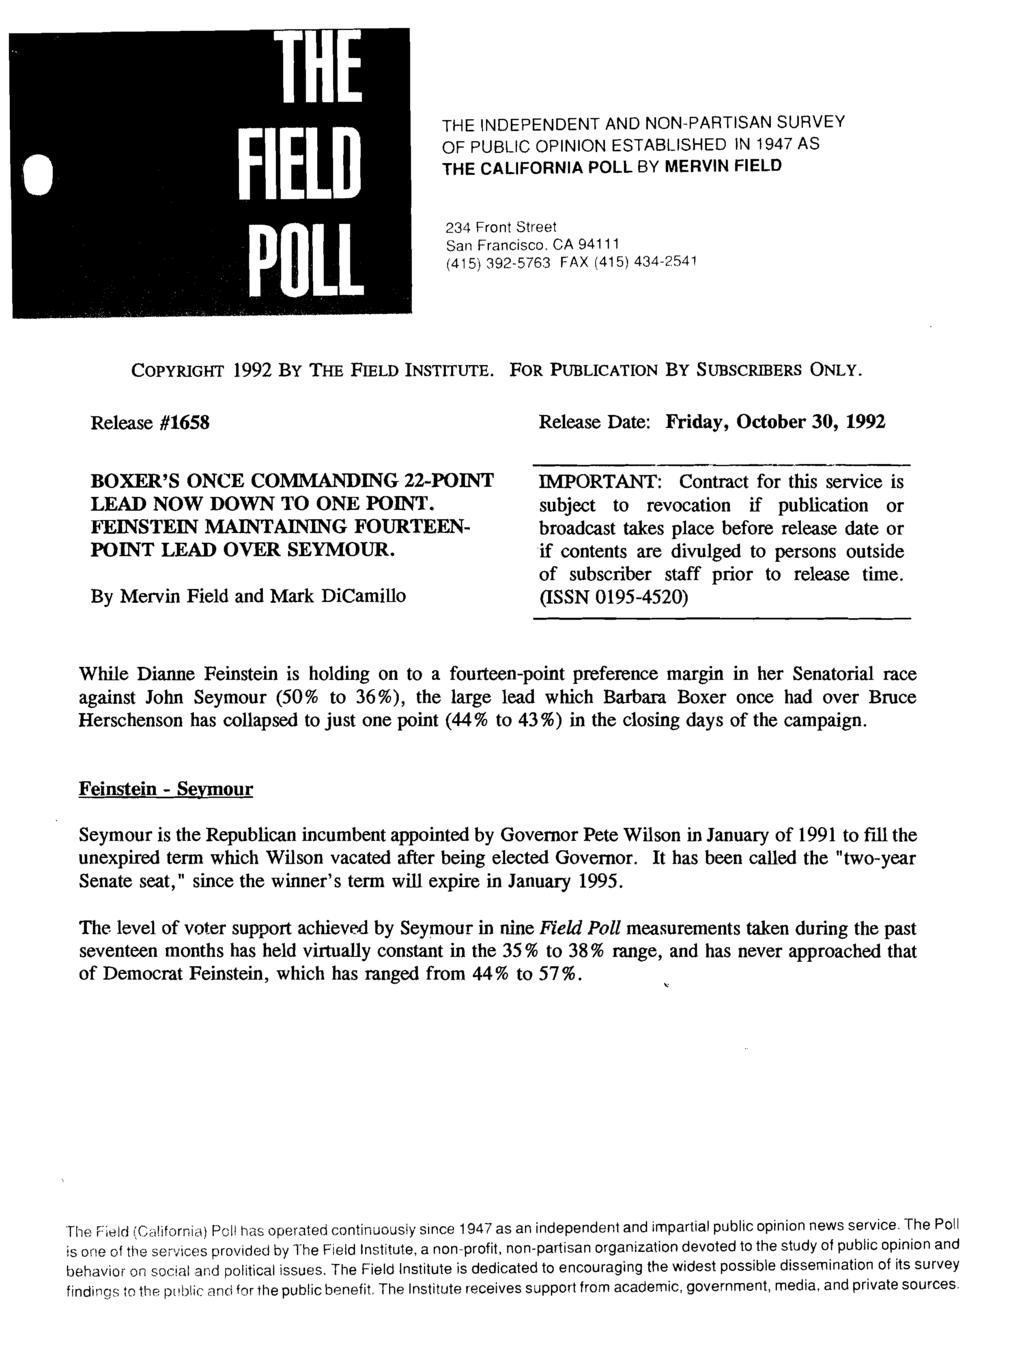 THE FIELD POLL THE INDEPENDENT AND NON-PARTISAN SURVEY OF PUBLIC OPINION ESTABLISHED IN 147 AS THE CALIFORNIA POLL BY MERVIN FIELD 234 Front Street San Francisco.